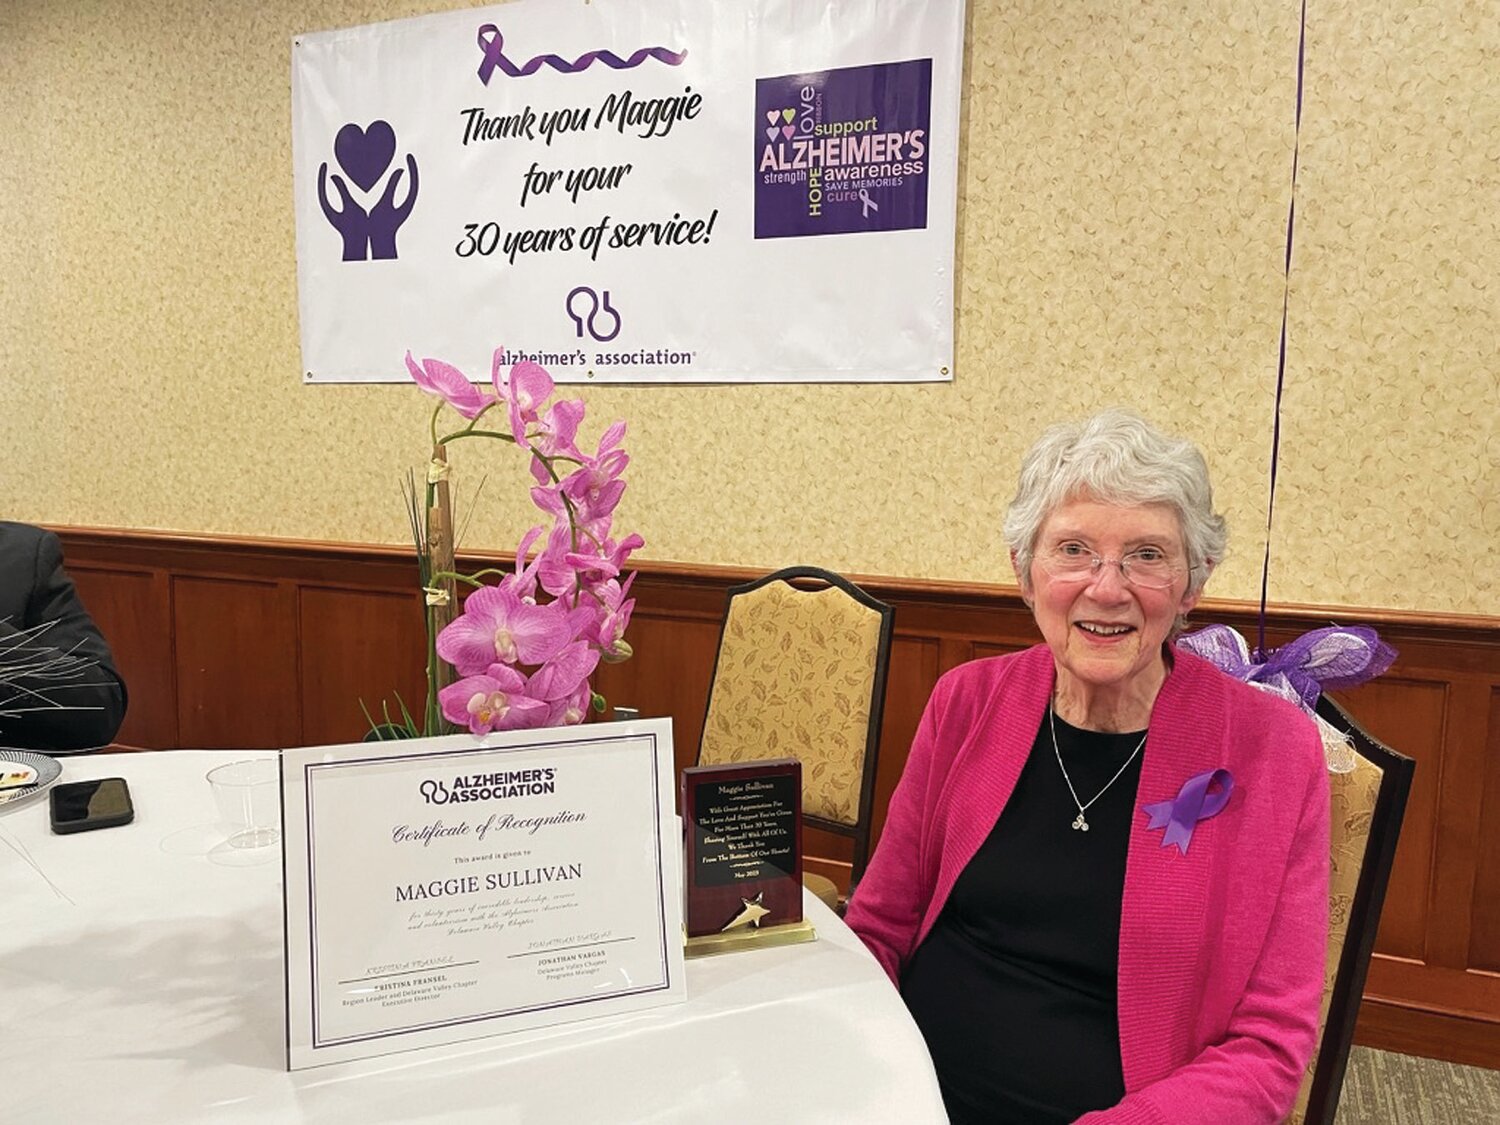 Maggie Sullivan was recently honored with an award from the Delaware Valley Chapter of the Alzheimer's Association for her 30 years of service.